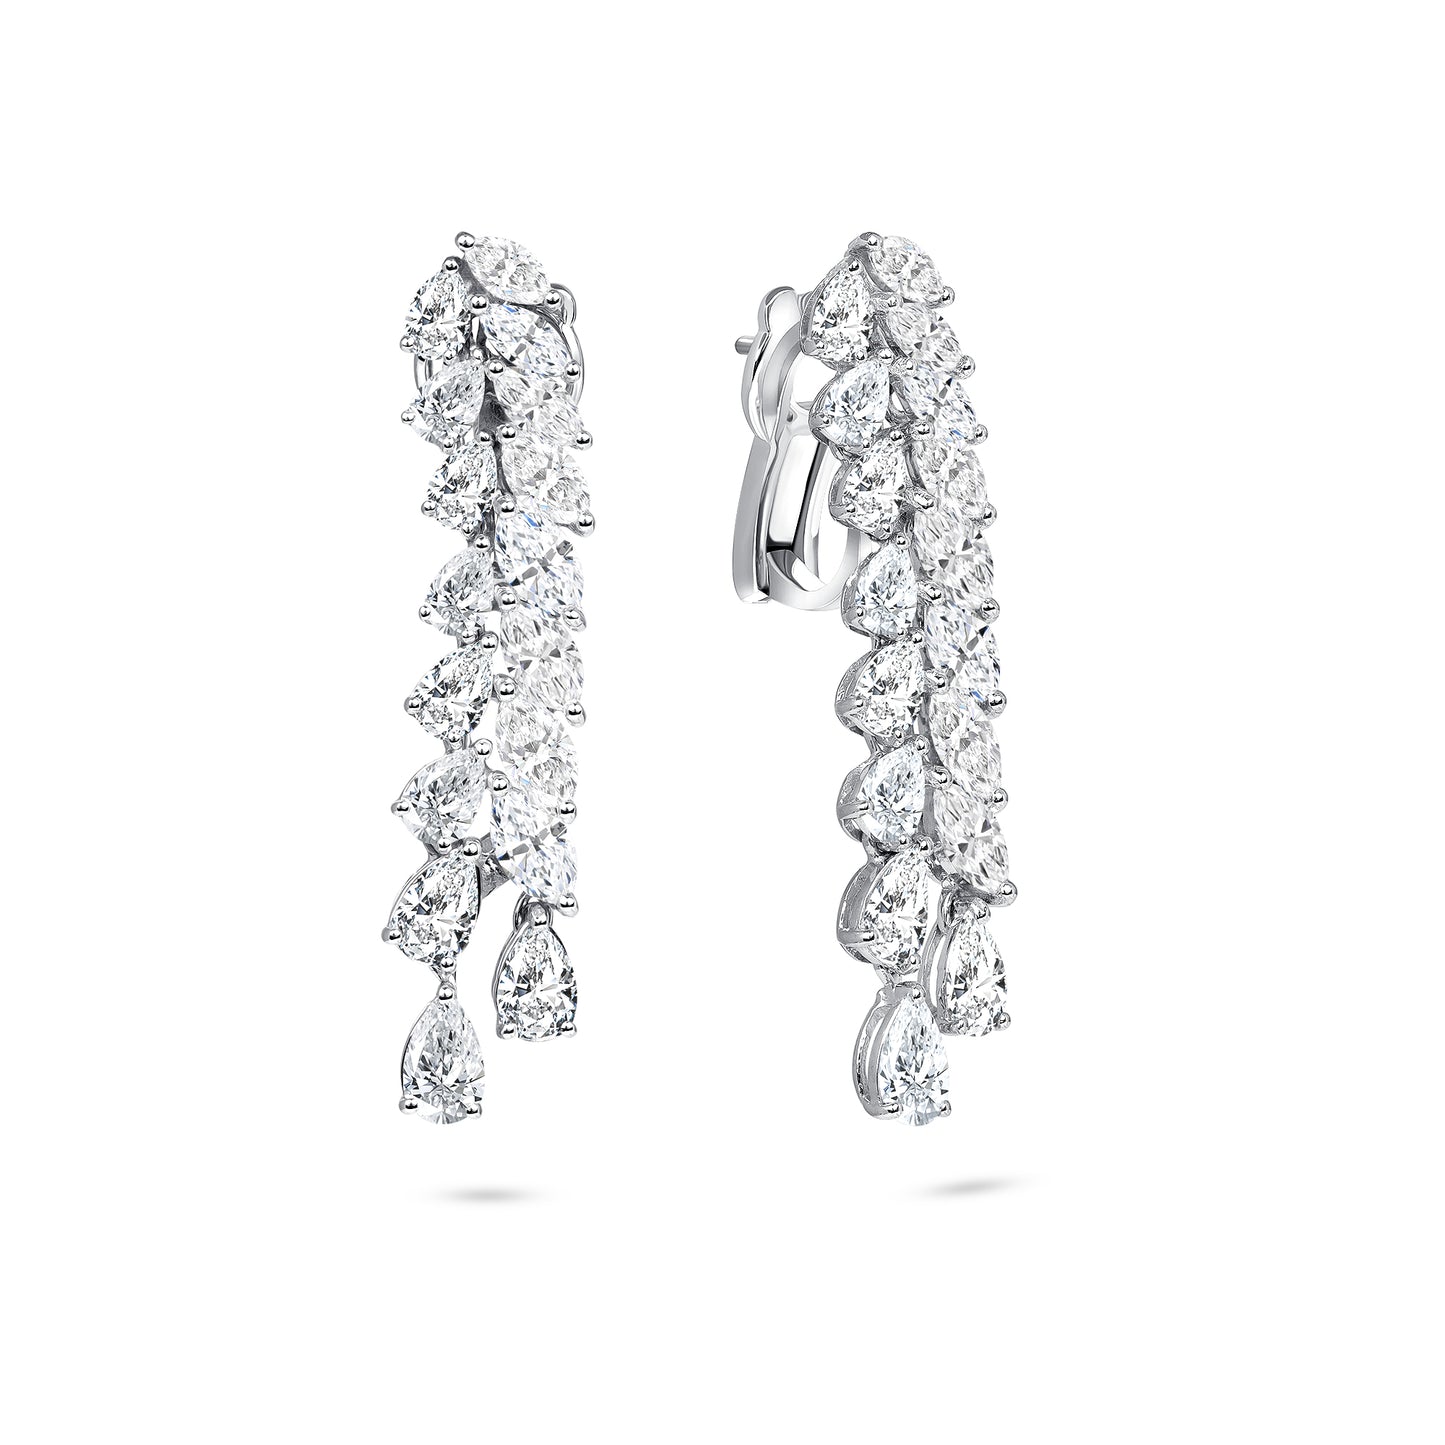 The Magnificent Diamond Earrings